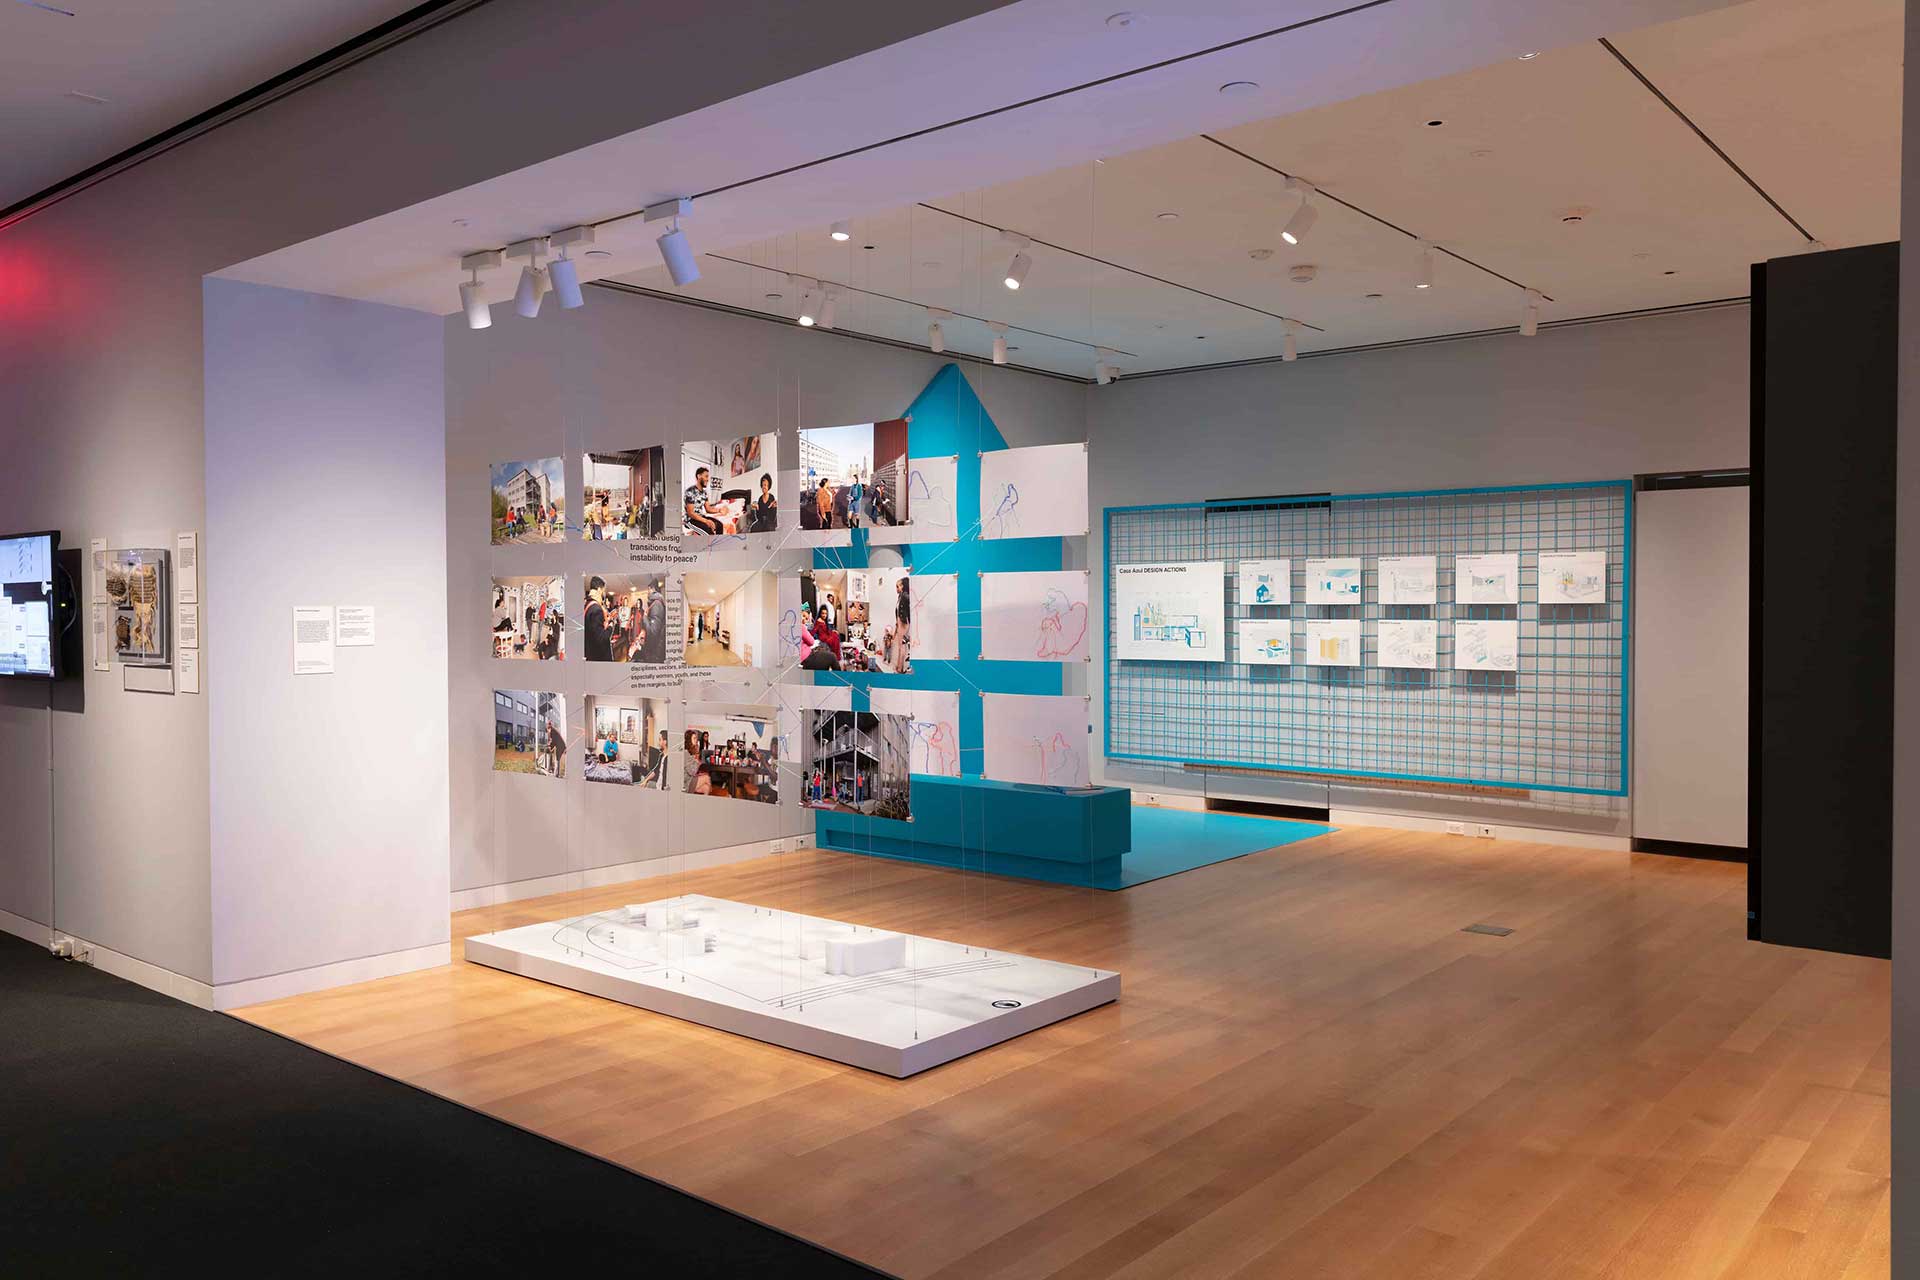 cooper-hewitt-walks-the-humanitarian-grounds-to-pursue-harmony-with-their-latest-exhibition-designing-peace